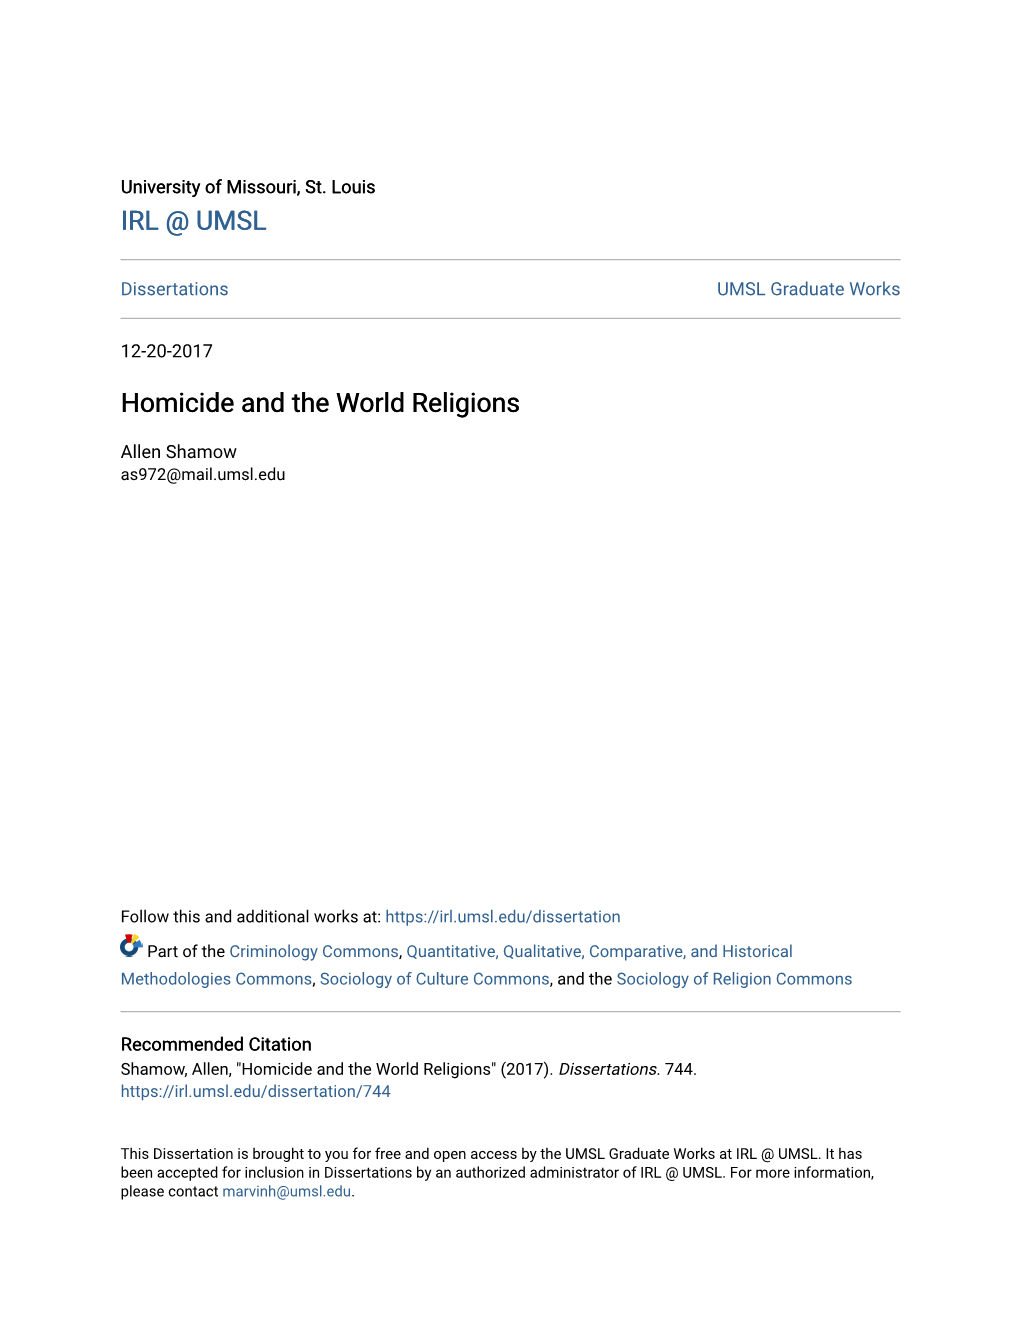 Homicide and the World Religions